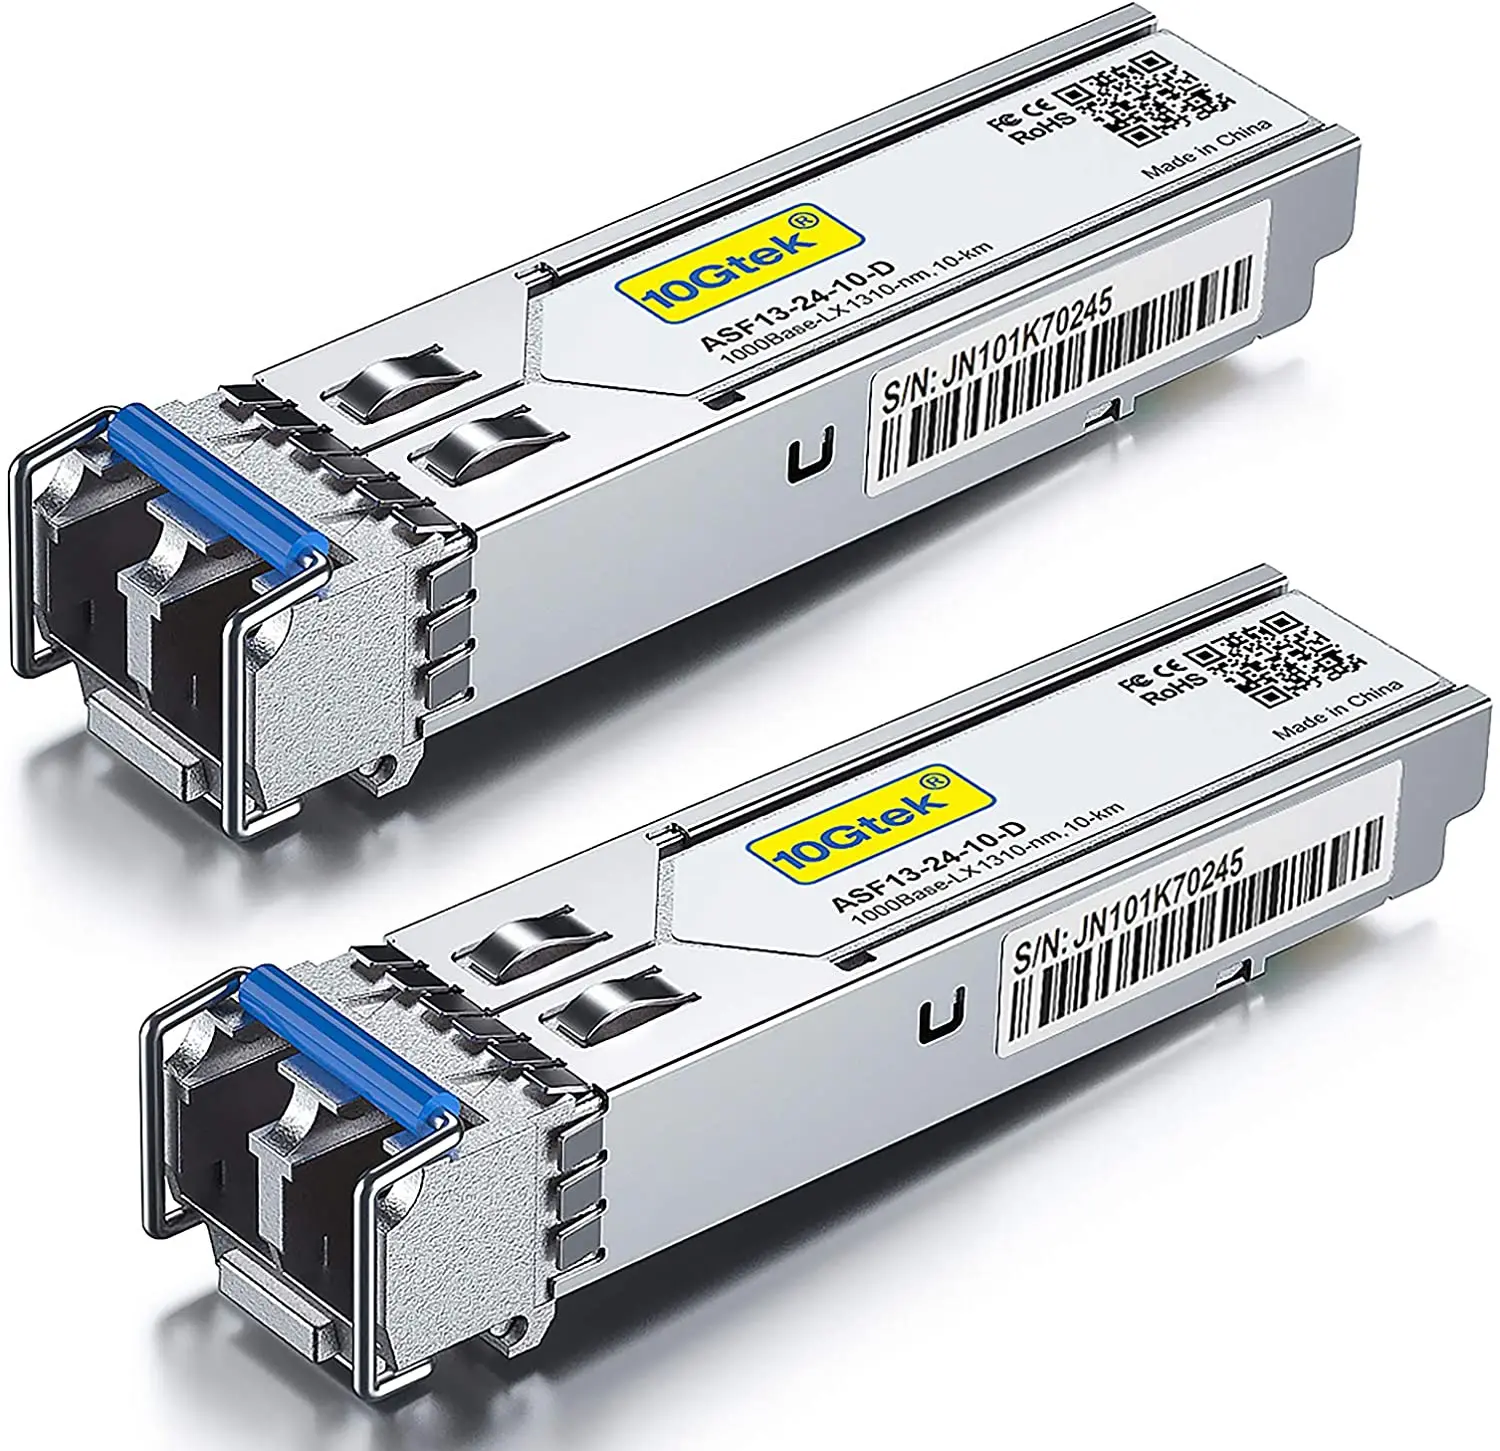 2Pack 1.25G SFP LX SFP Transceiver Module, 1310nm SMF, up to 10 km, Dual LC, for Cisco GLC-LH-SMD, Ubiquiti UniFi, D-LINK etc 9 inch s9 3g dual core communication cable lixin bf 58909011 lcd screen lcd module screen